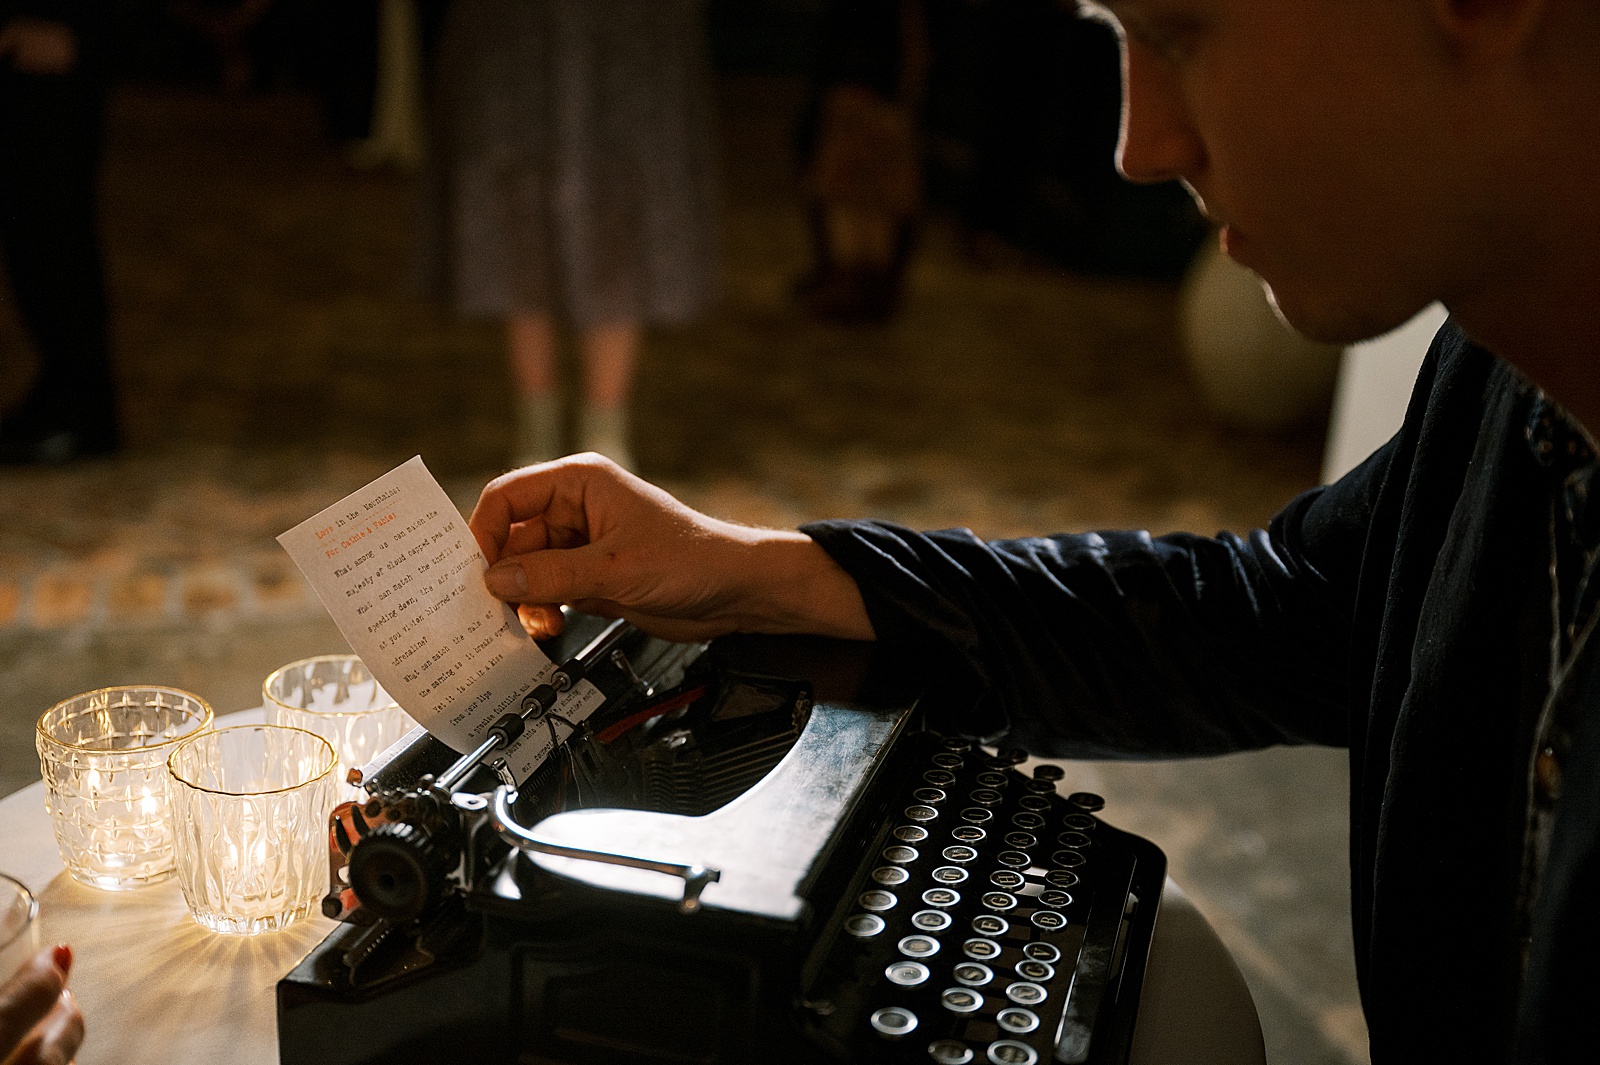 A wedding poet pulls a piece of paper off a typewriter in a creative wedding photo.